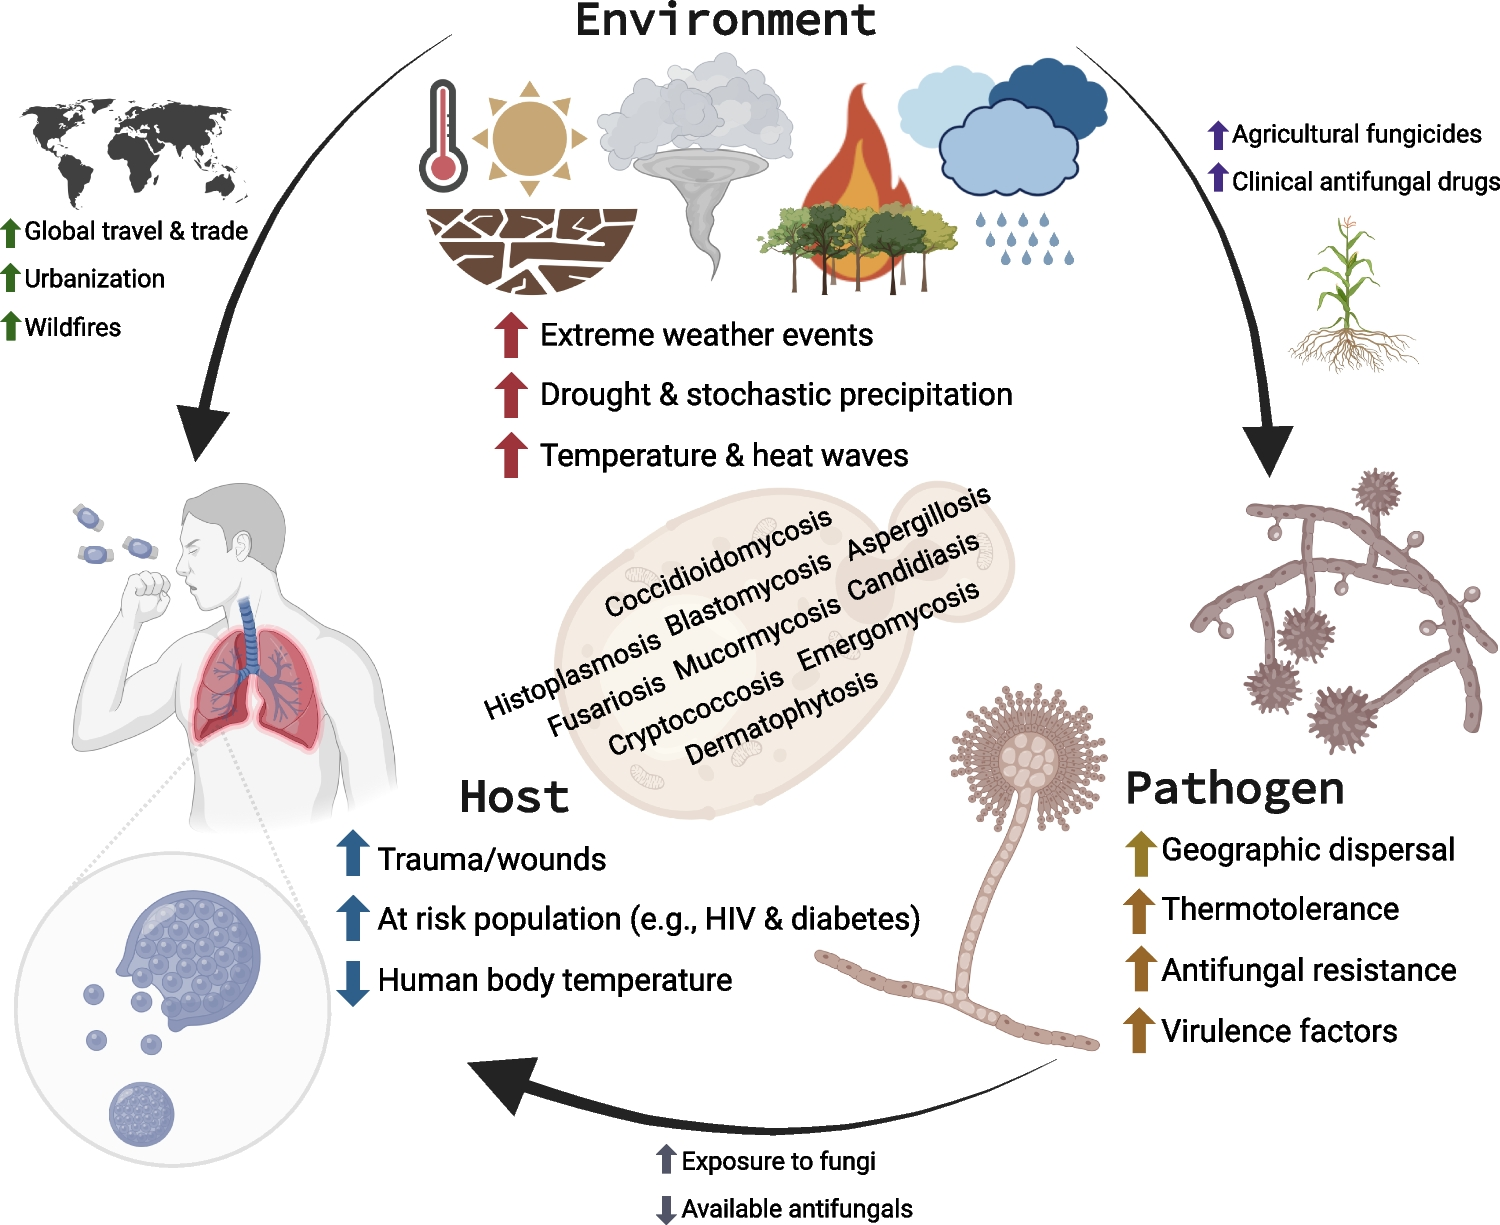 The Impact of Climate Change on Human Fungal Pathogen Distribution and Disease Incidence